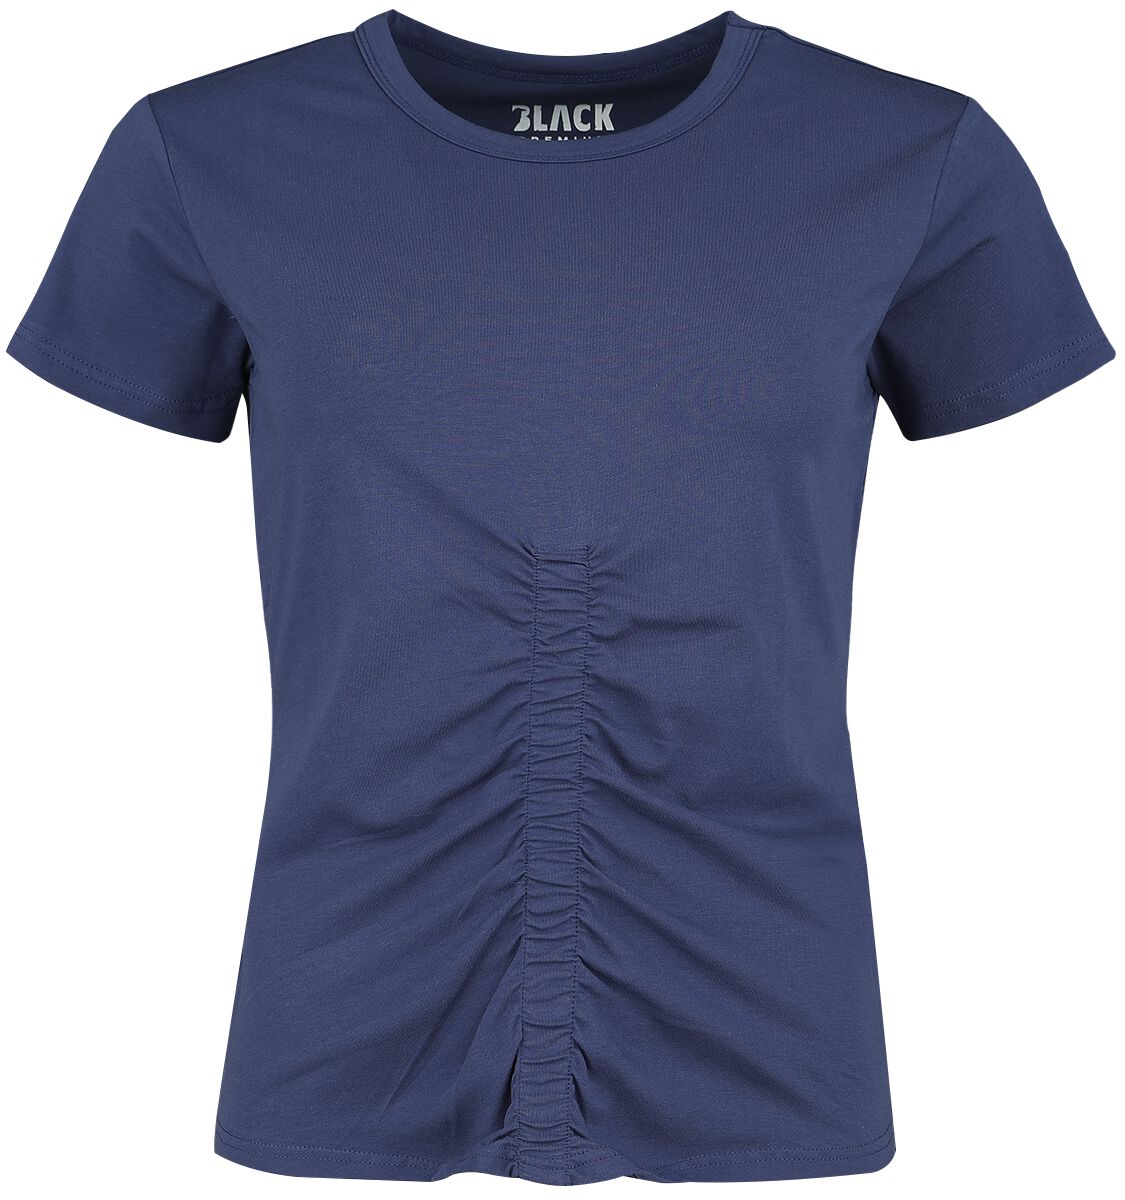 Image of T-Shirt di Black Premium by EMP - Blue t-shirt, gathered at the front - XS a XXL - Donna - blu